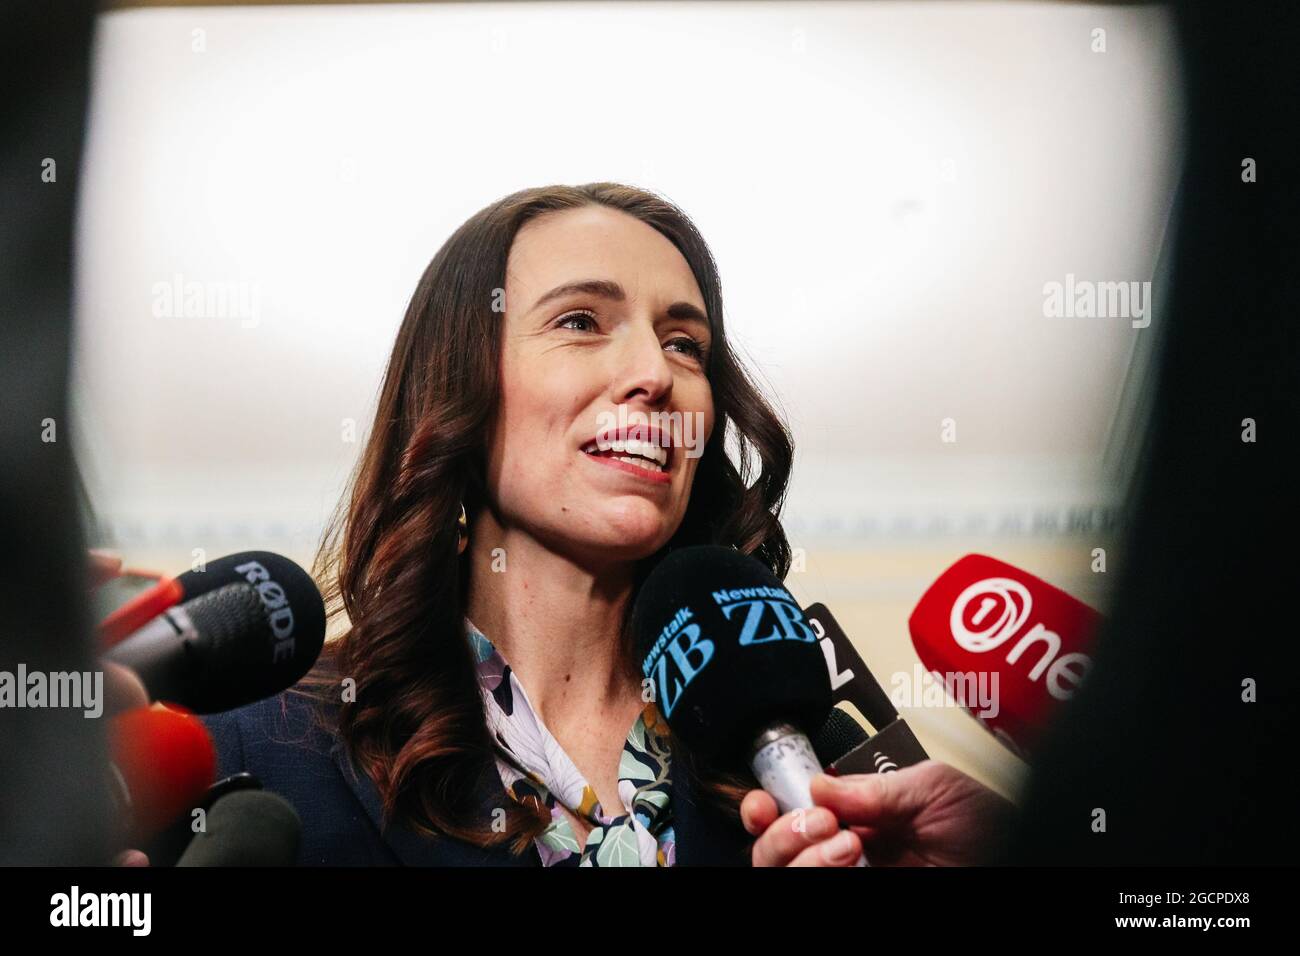 Wellington, New Zealand, 10 August 2021. New Zealand Prime Minister Jacinda Ardern smiles as she talks to press gallery reporters about overnight power outages triggered by high electricity demand during a winter cold snap.  Credit: Lynn Grieveson/Alamy Live News Stock Photo